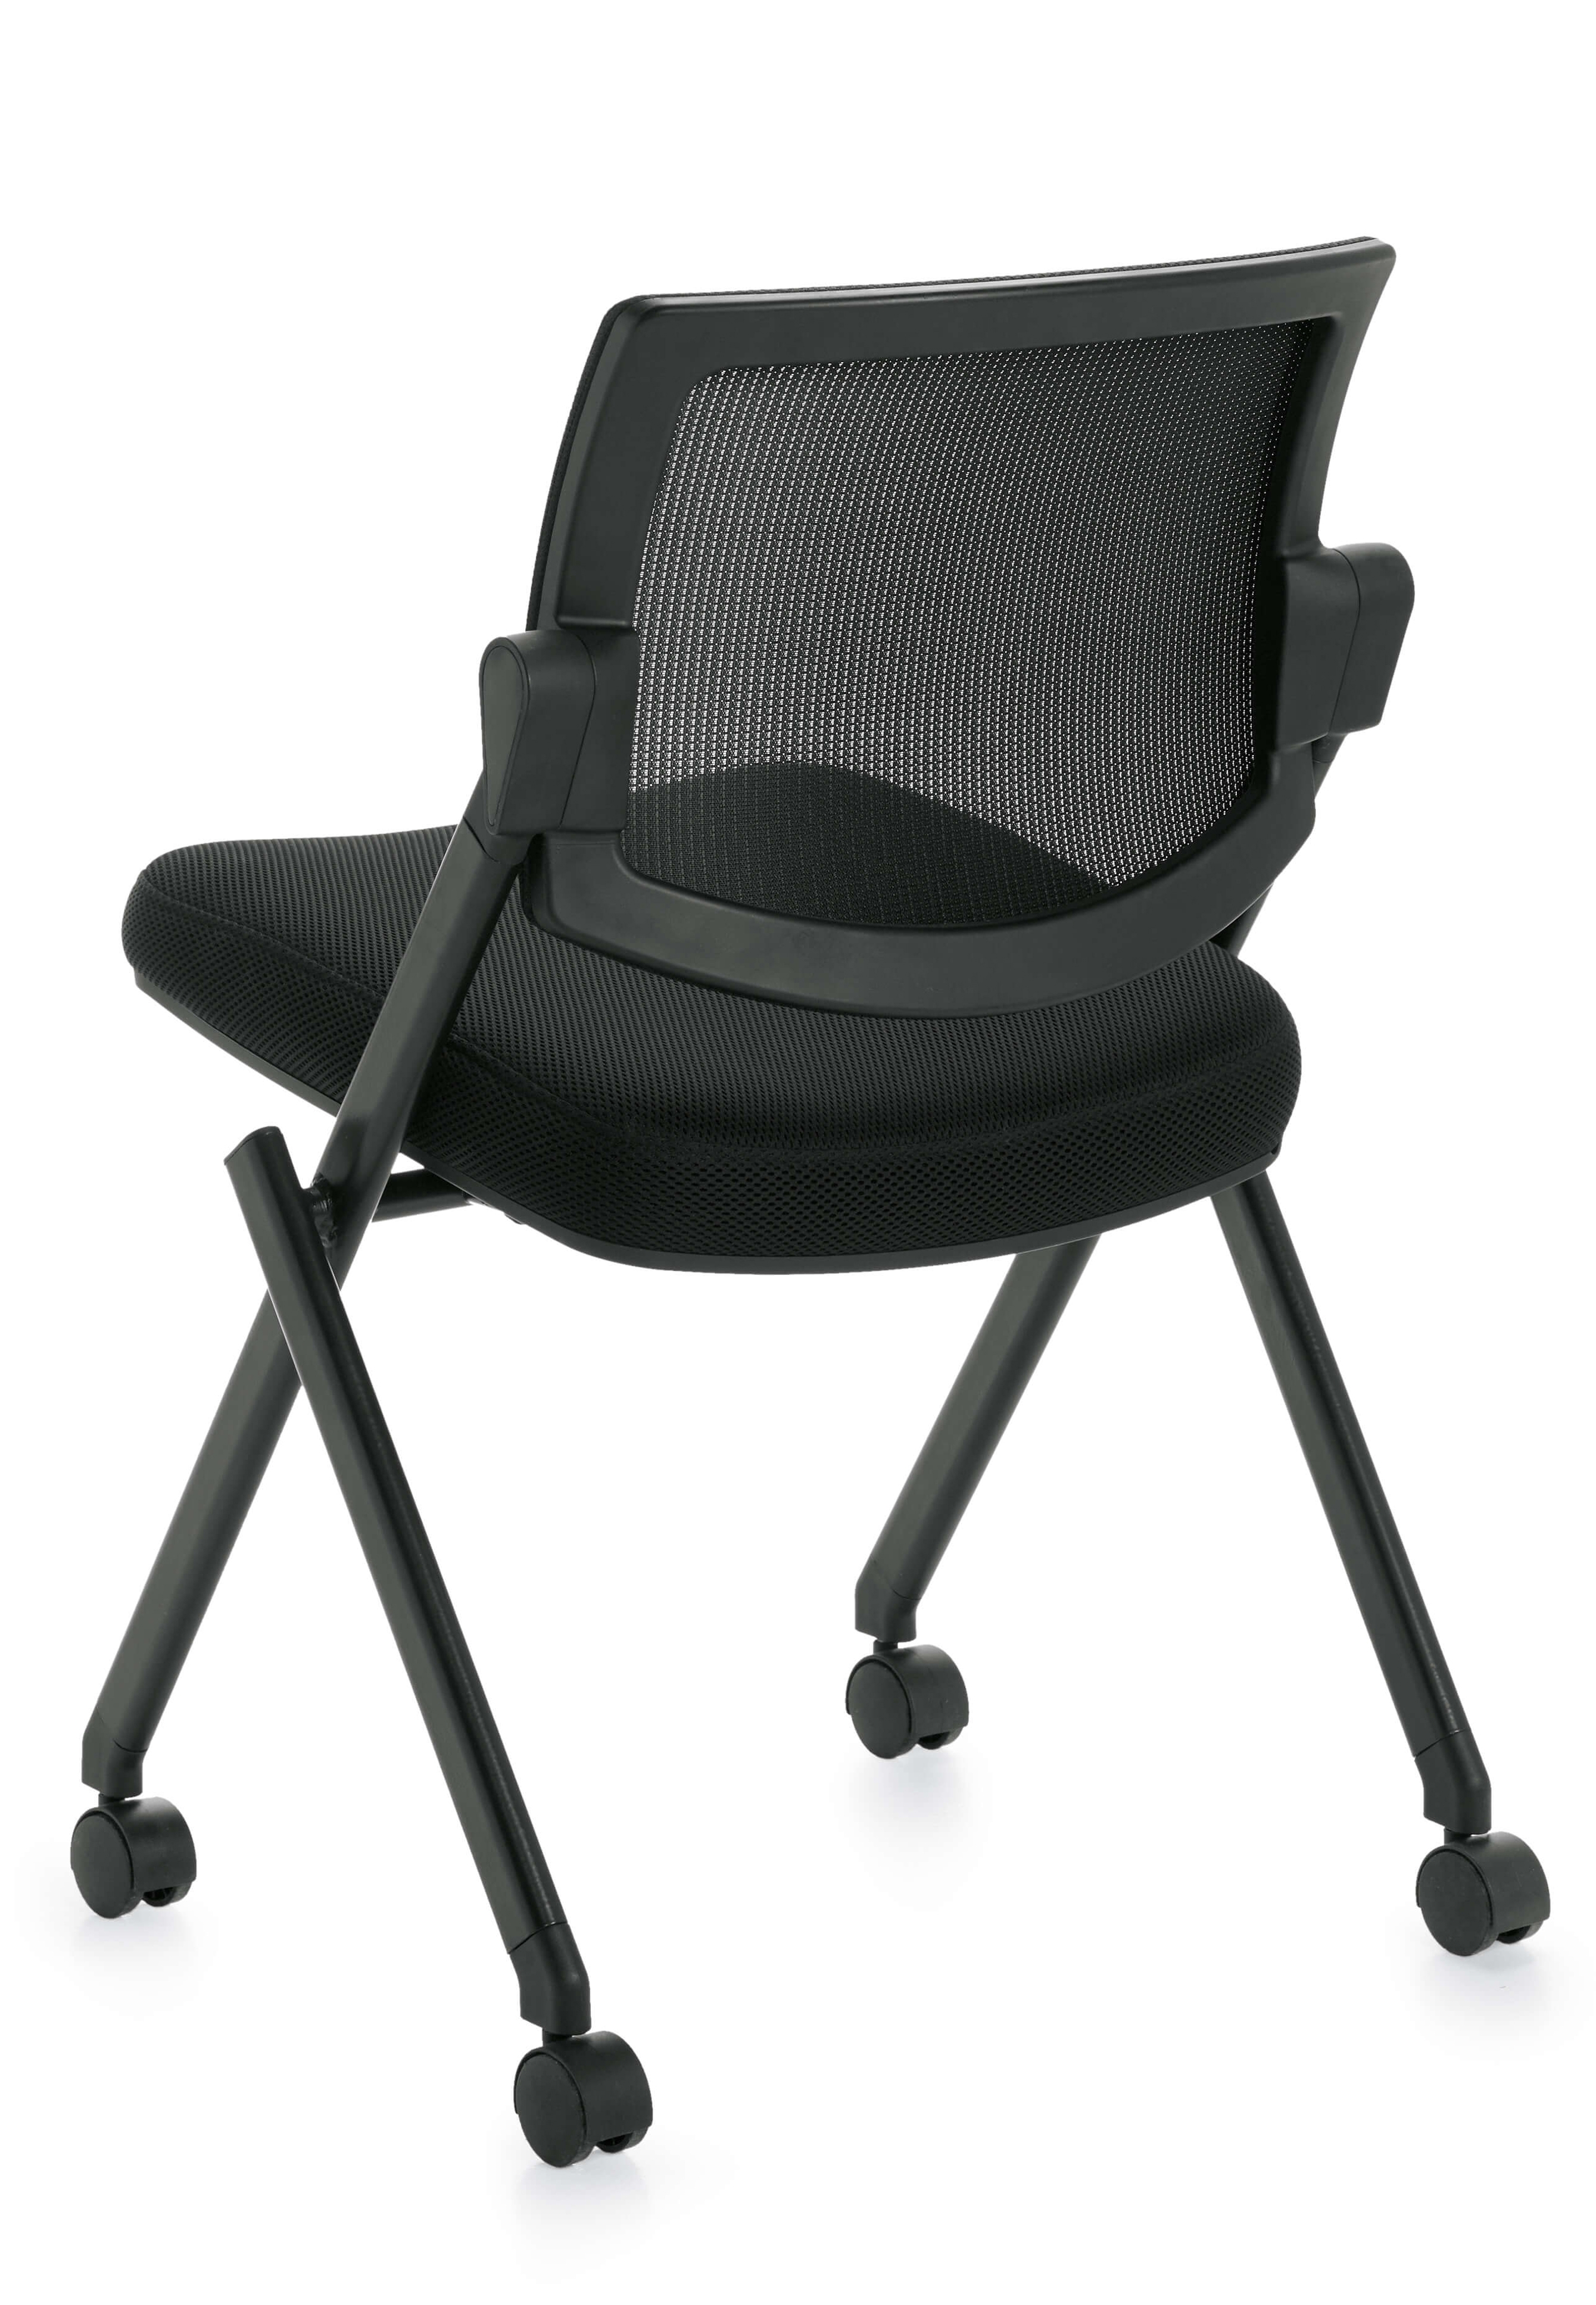 Armless office chairs back